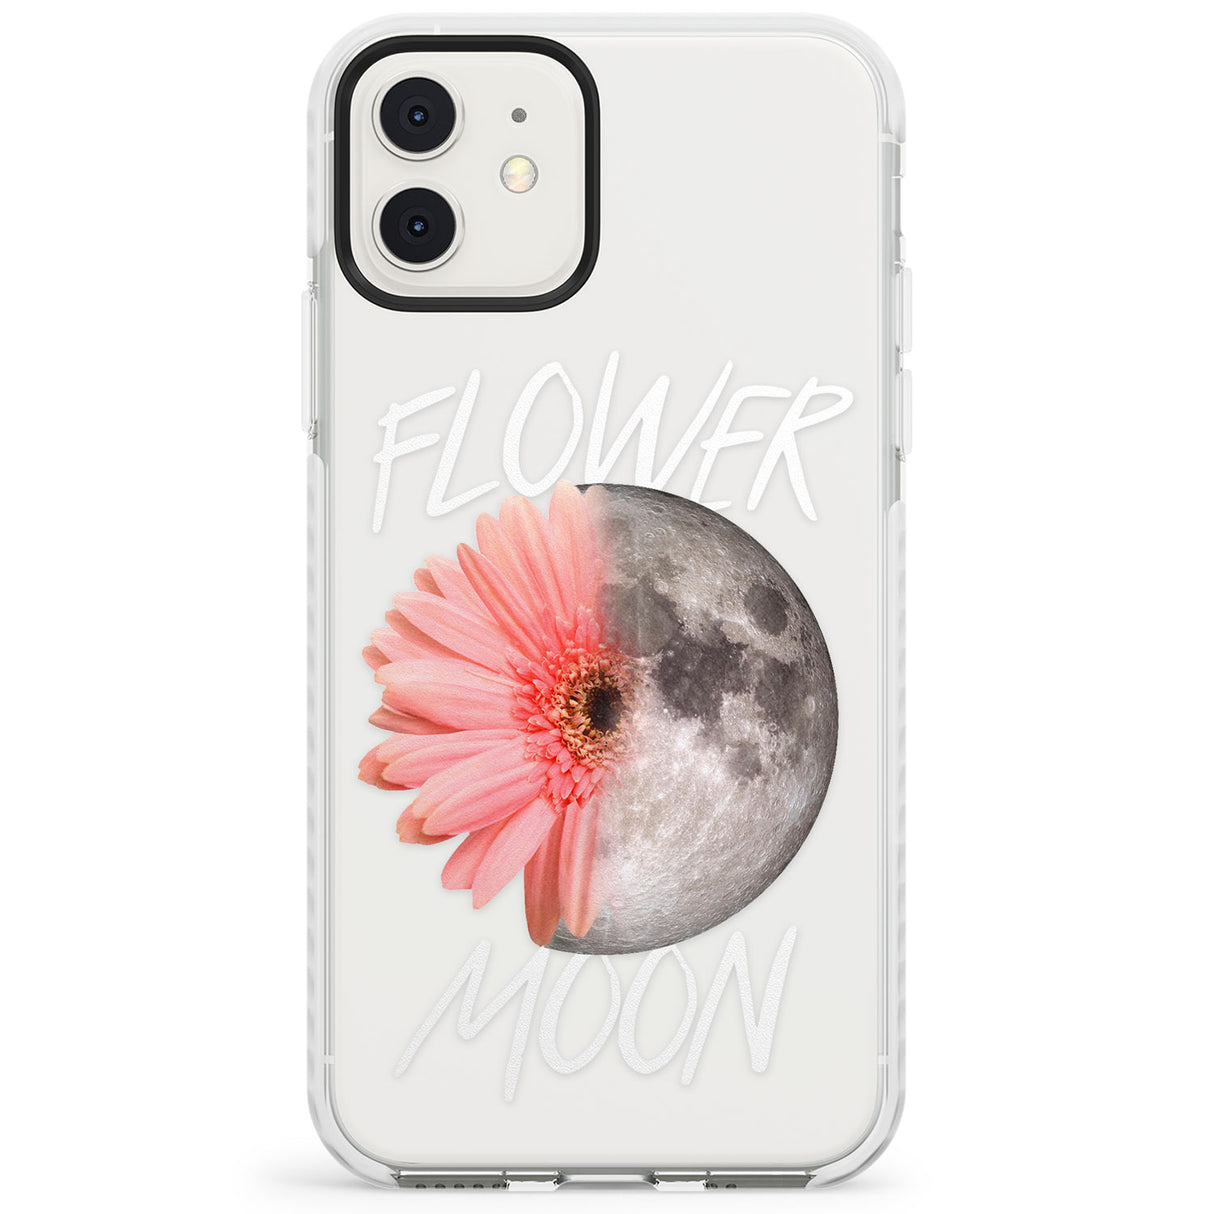 Flower Moon Impact Phone Case for iPhone 11, iphone 12